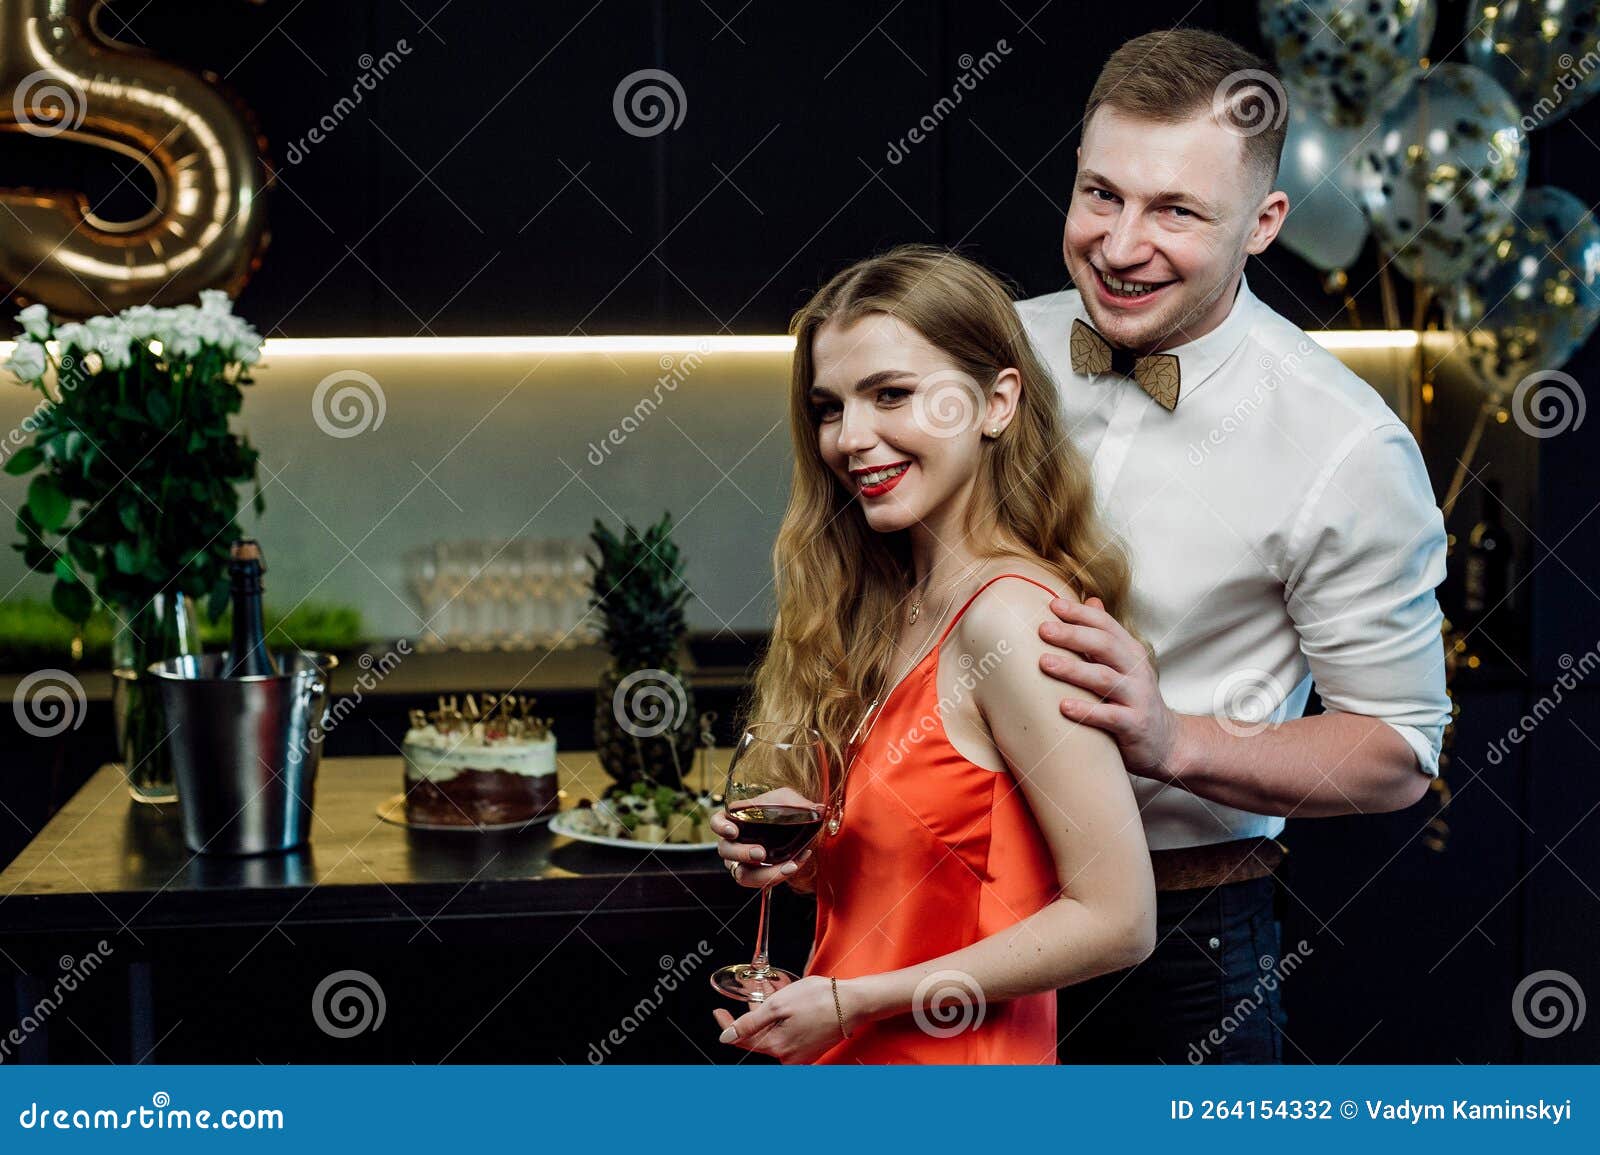 1,135 Couples Party Props Royalty-Free Photos and Stock Images |  Shutterstock